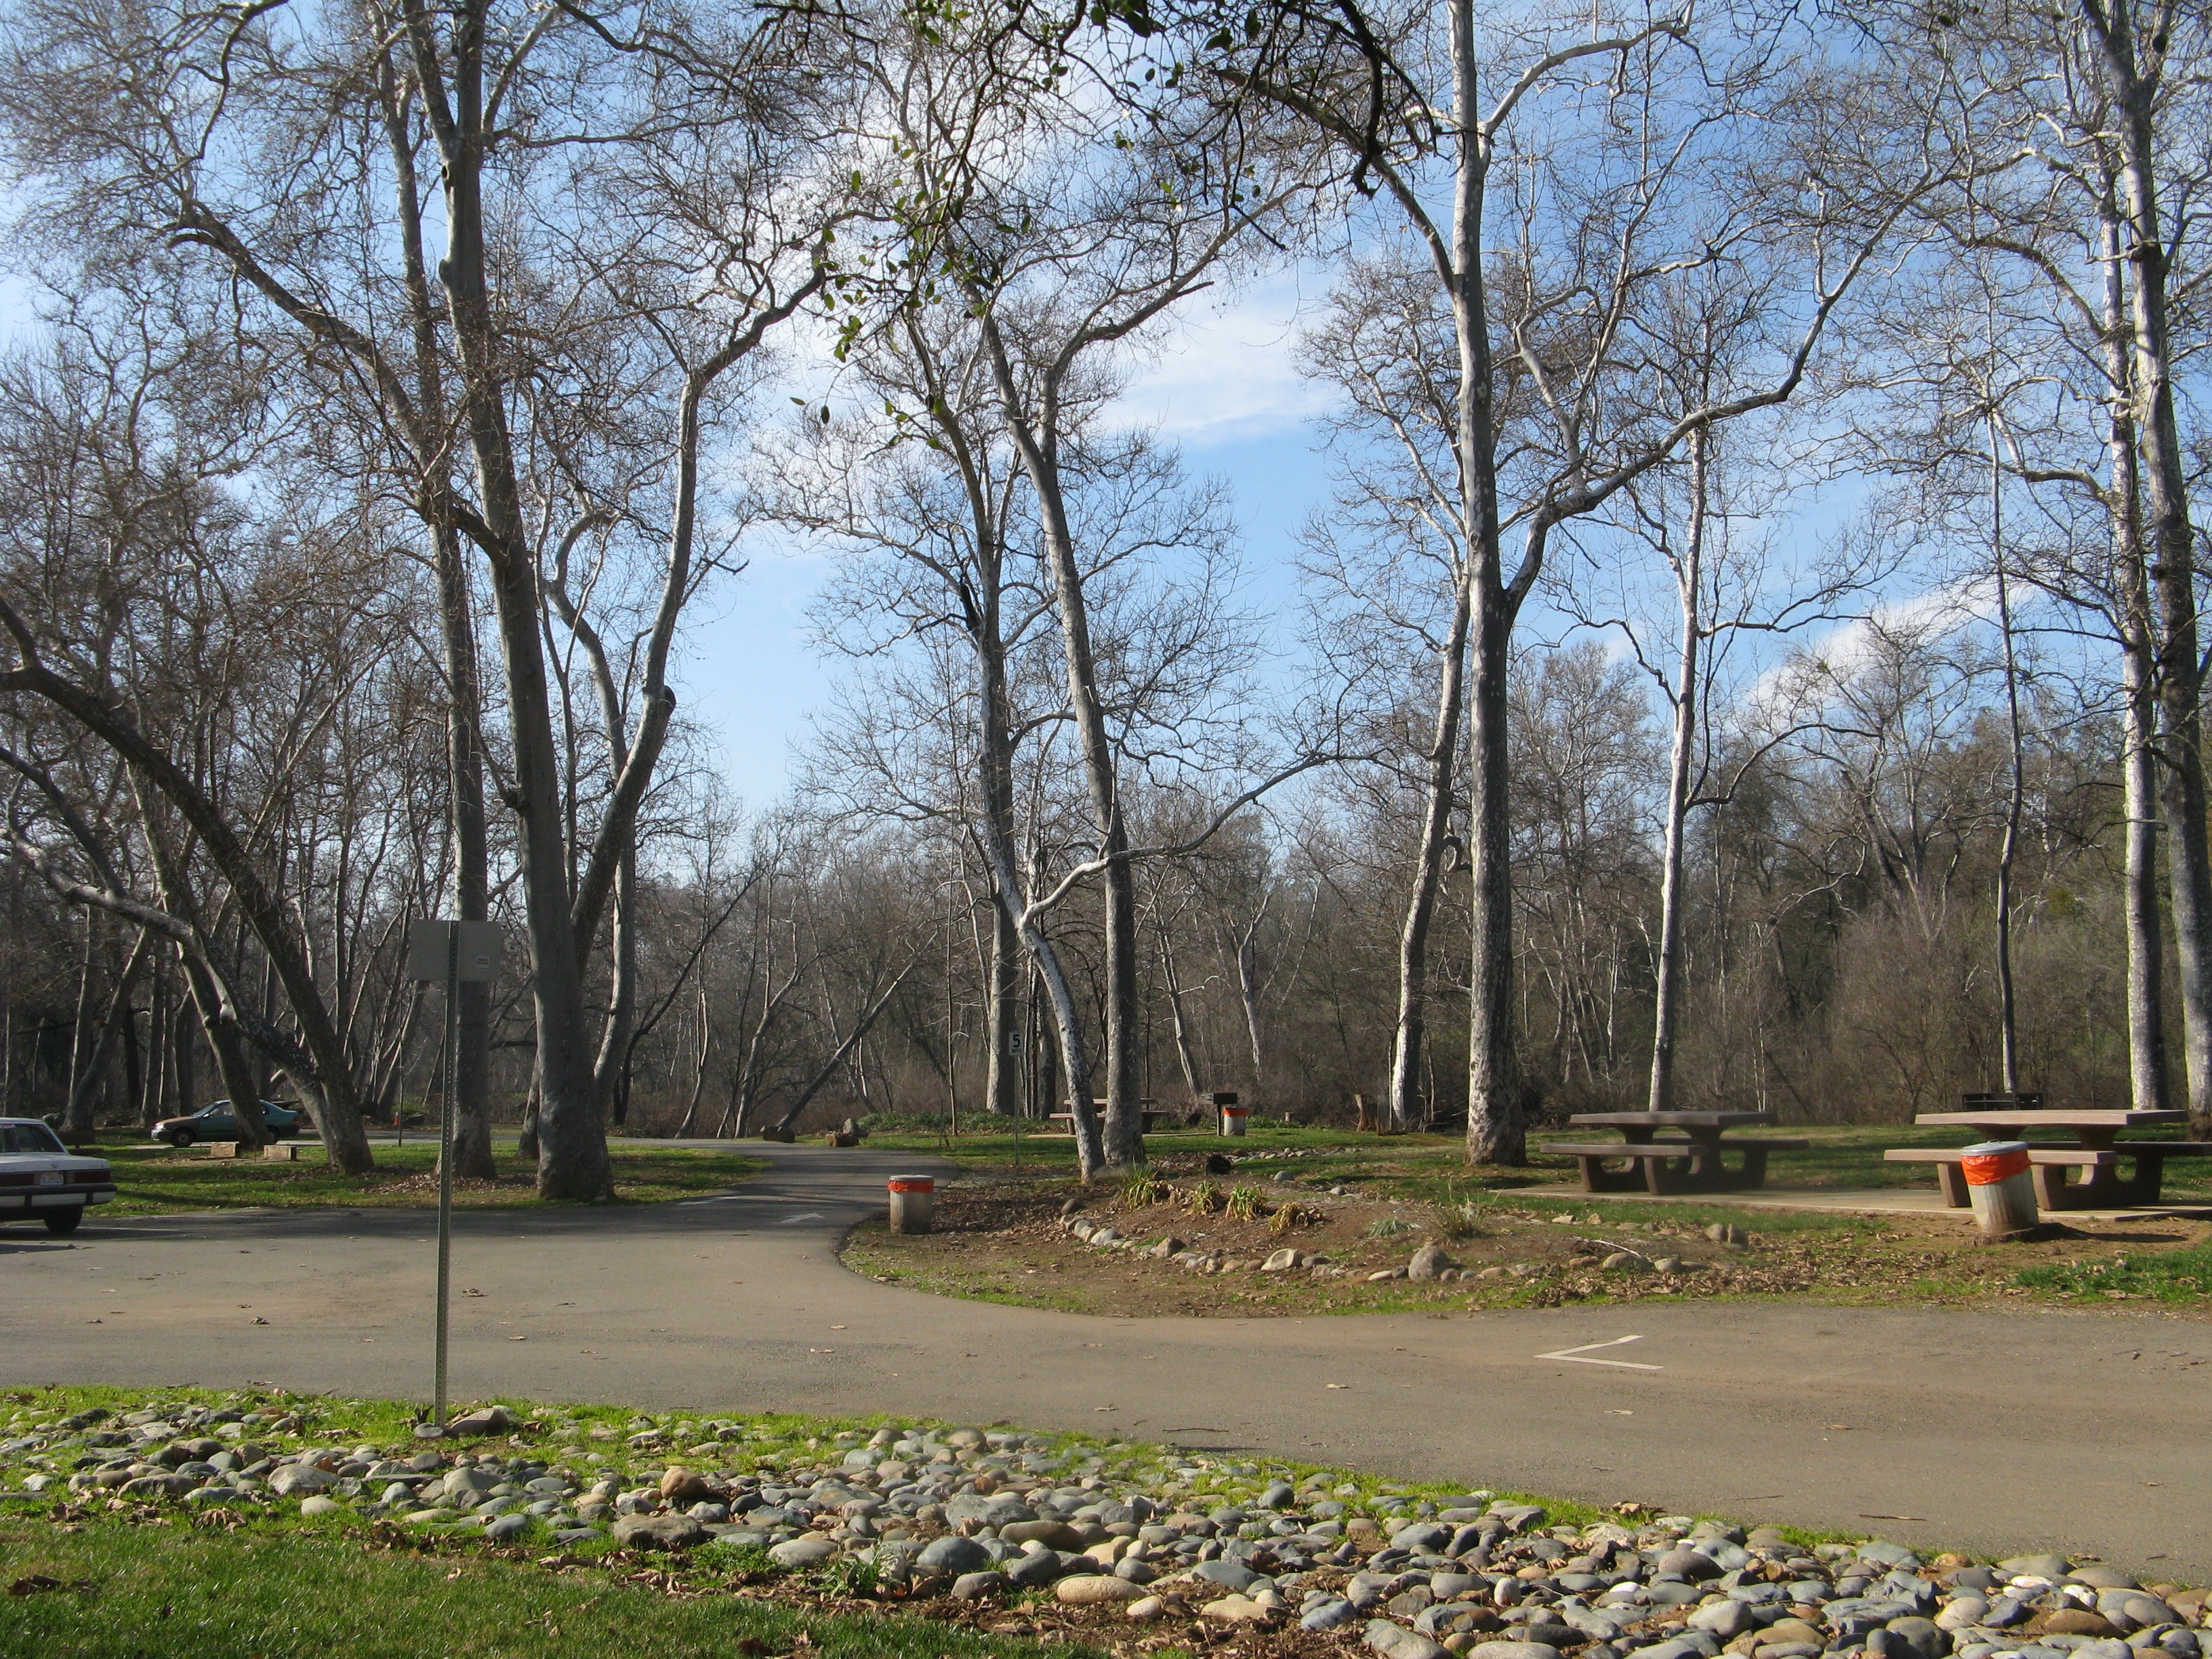 View of the Picnic Area from the Marker